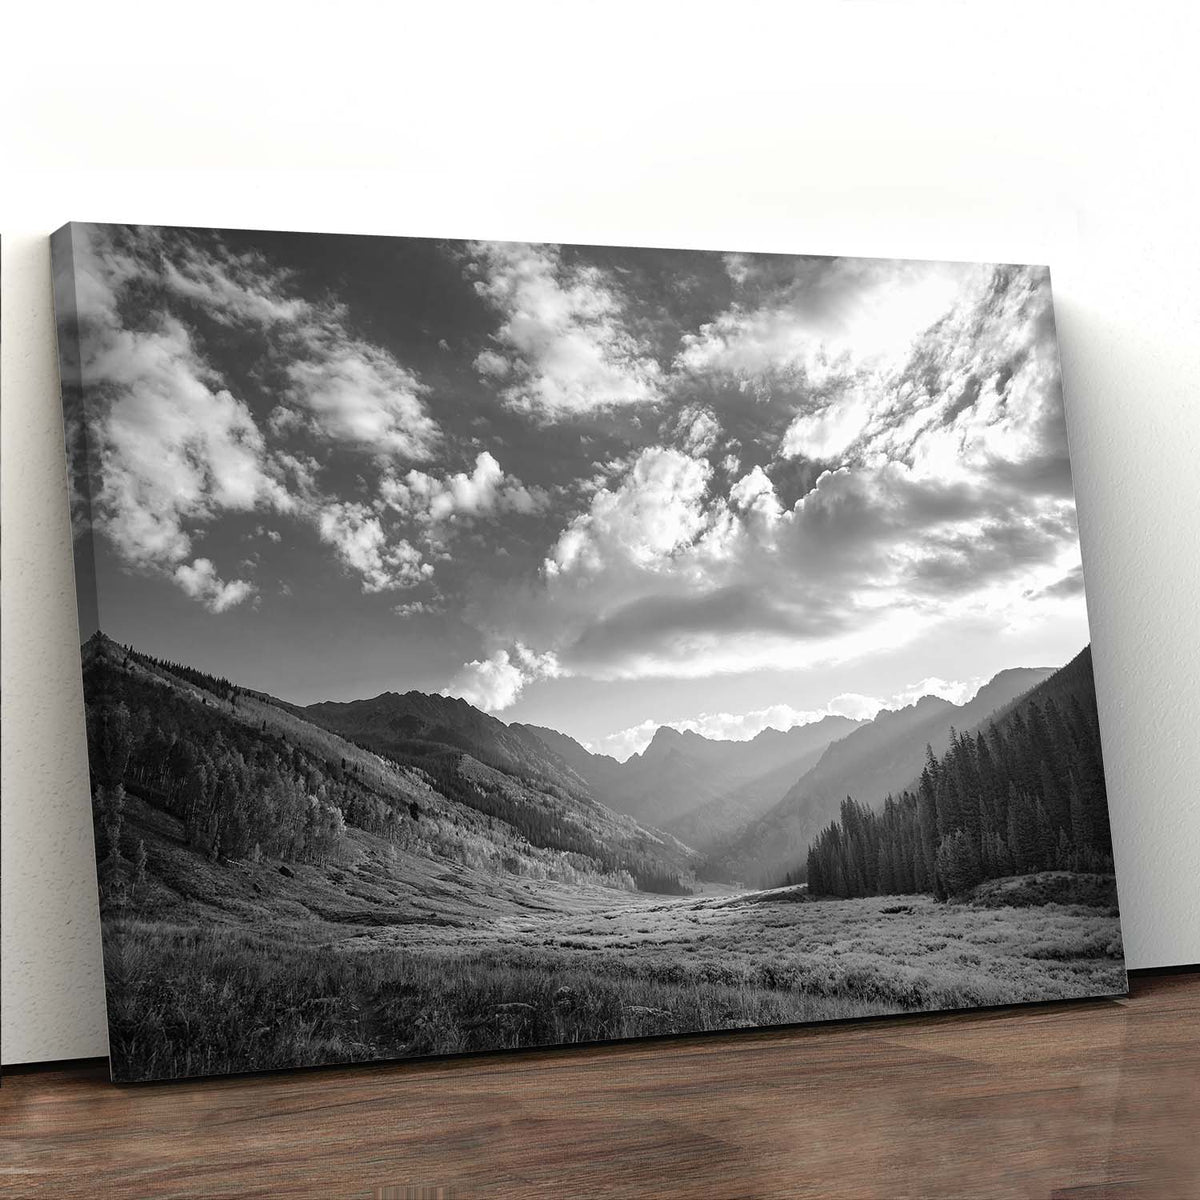 Morning Light at Piney - Canvas Print by Emily Kent | Art Bloom Canvas Art